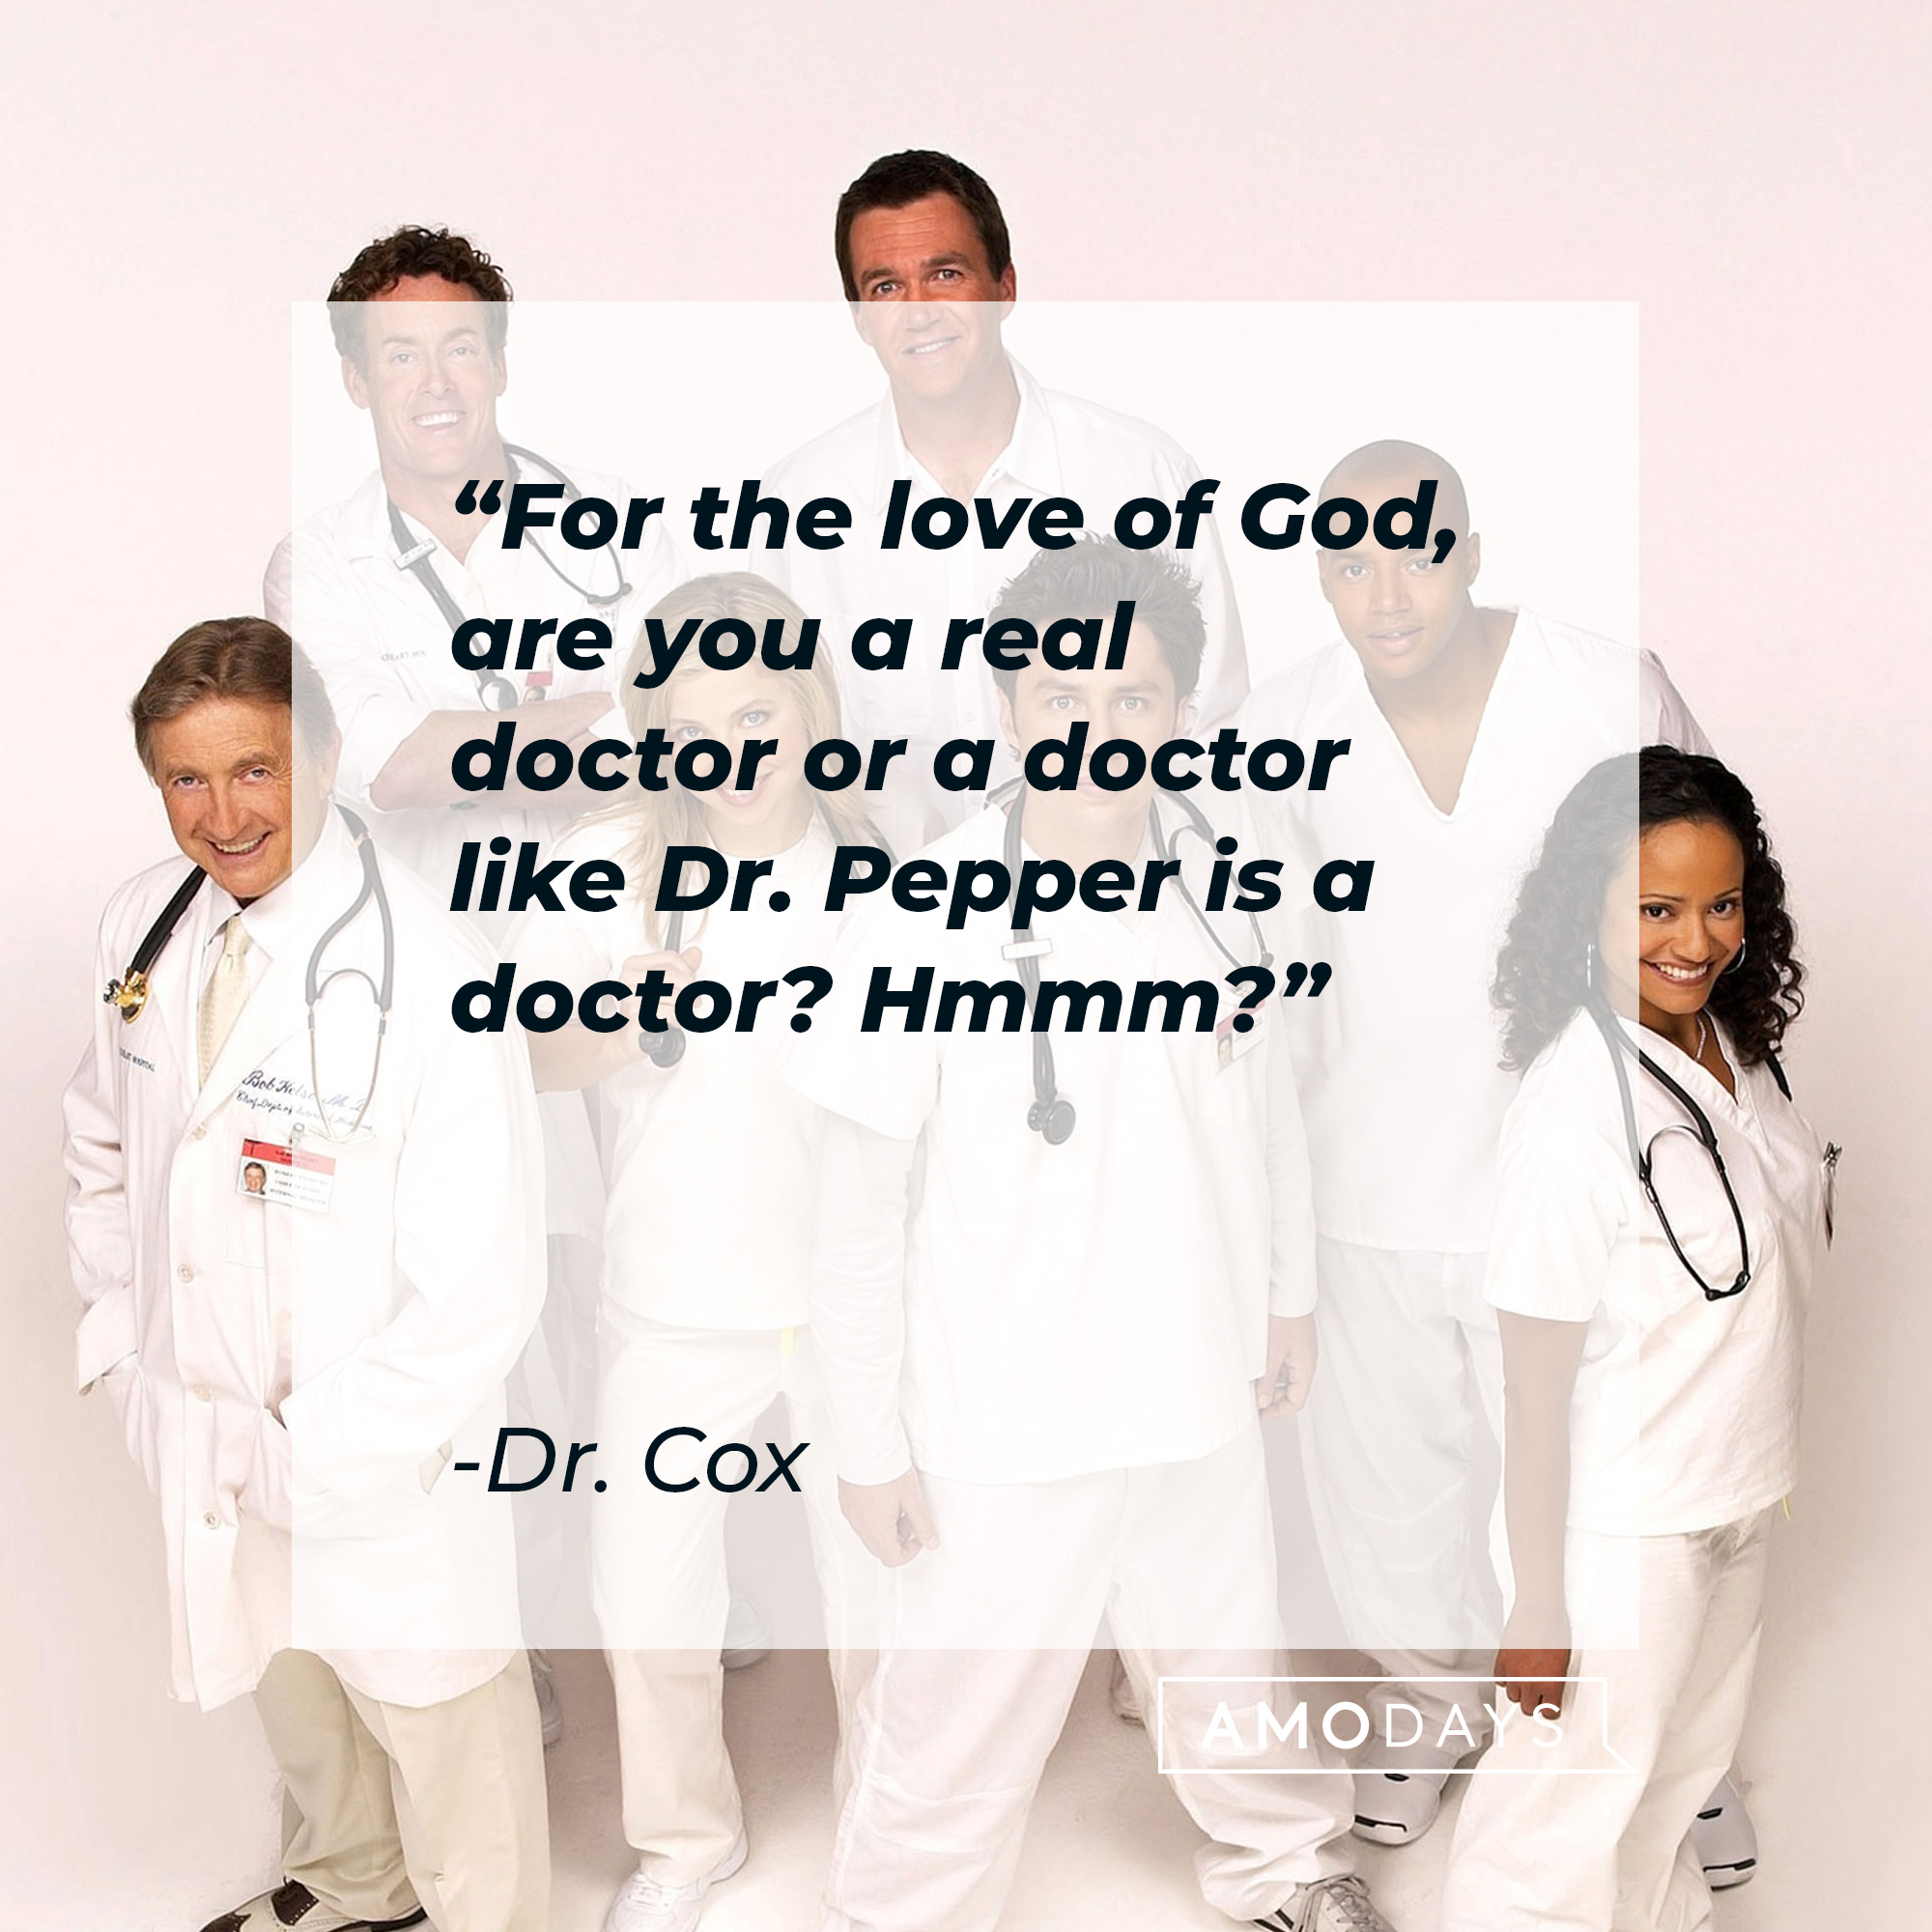 Multiple characters from ”Scrubs” with Dr. Cox’s quote: "For the love of God, are you a real doctor or a doctor like Dr. Pepper is a doctor? Hmmm?” | Source: Facebook.com/scrubs